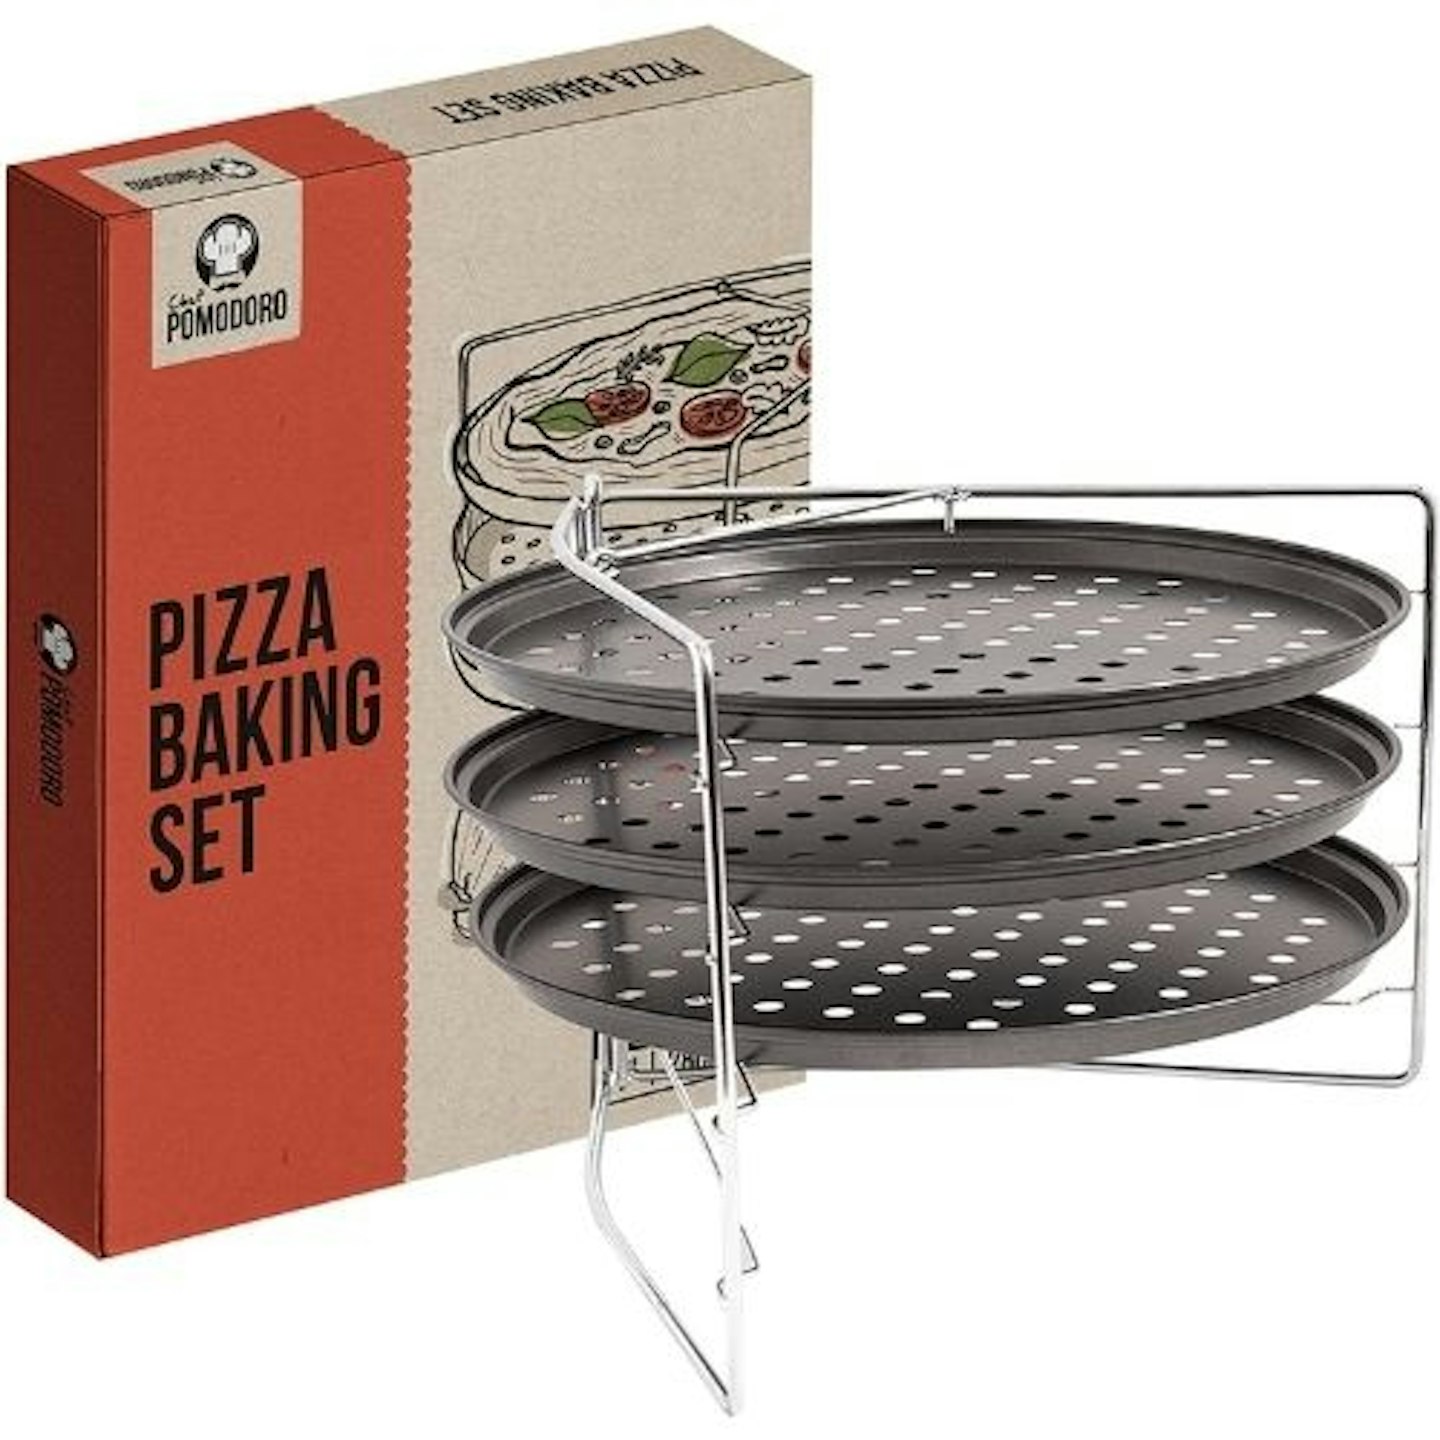 Chef Pomodoro, Pizza Baking Set (3 Pizza Pans and Rack)